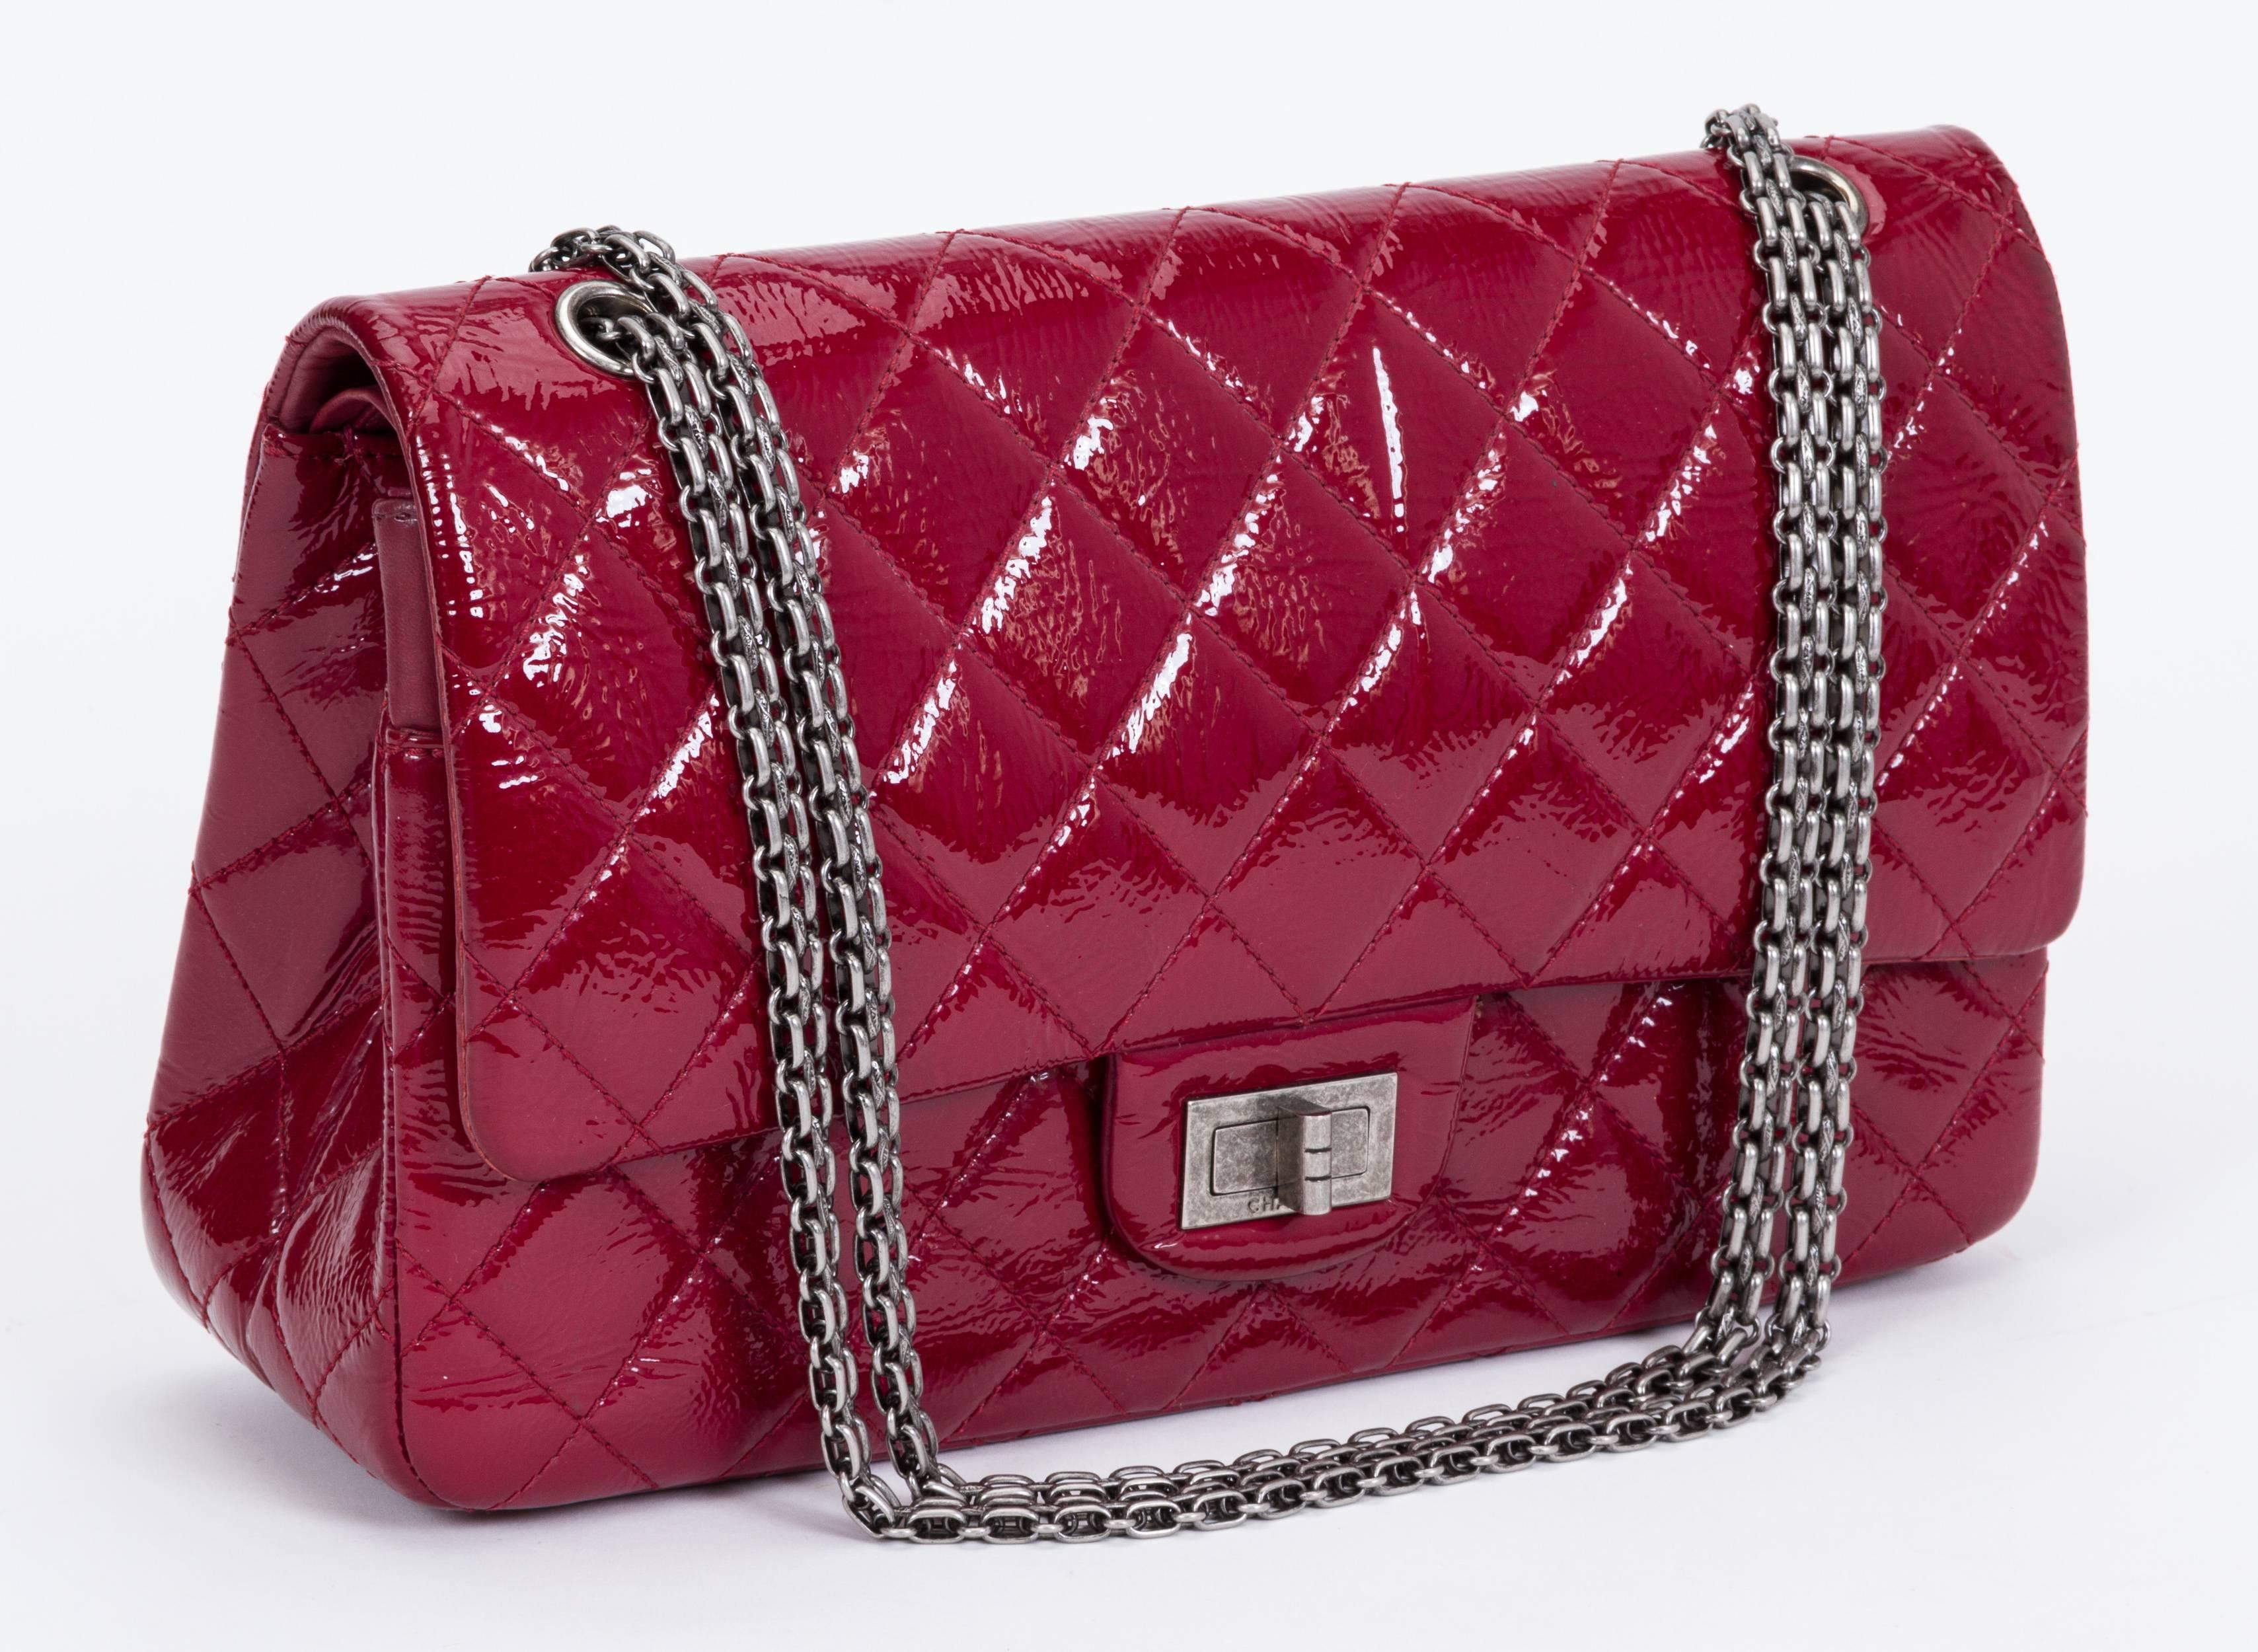 Chanel reissue jumbo double-flap bag in burgundy quilted patent leather with gunmetal hardware. Shoulder drop, 11